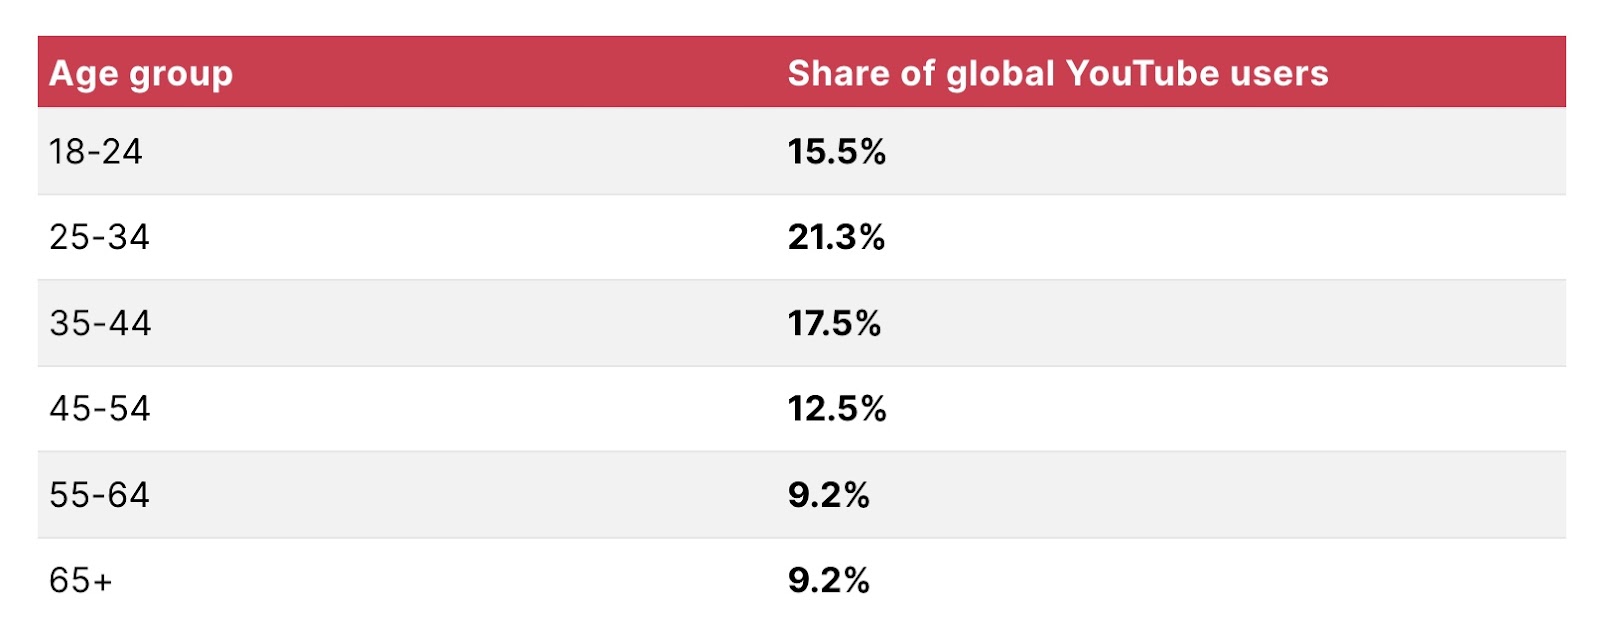 A table showing the age group and share of global YouTube users